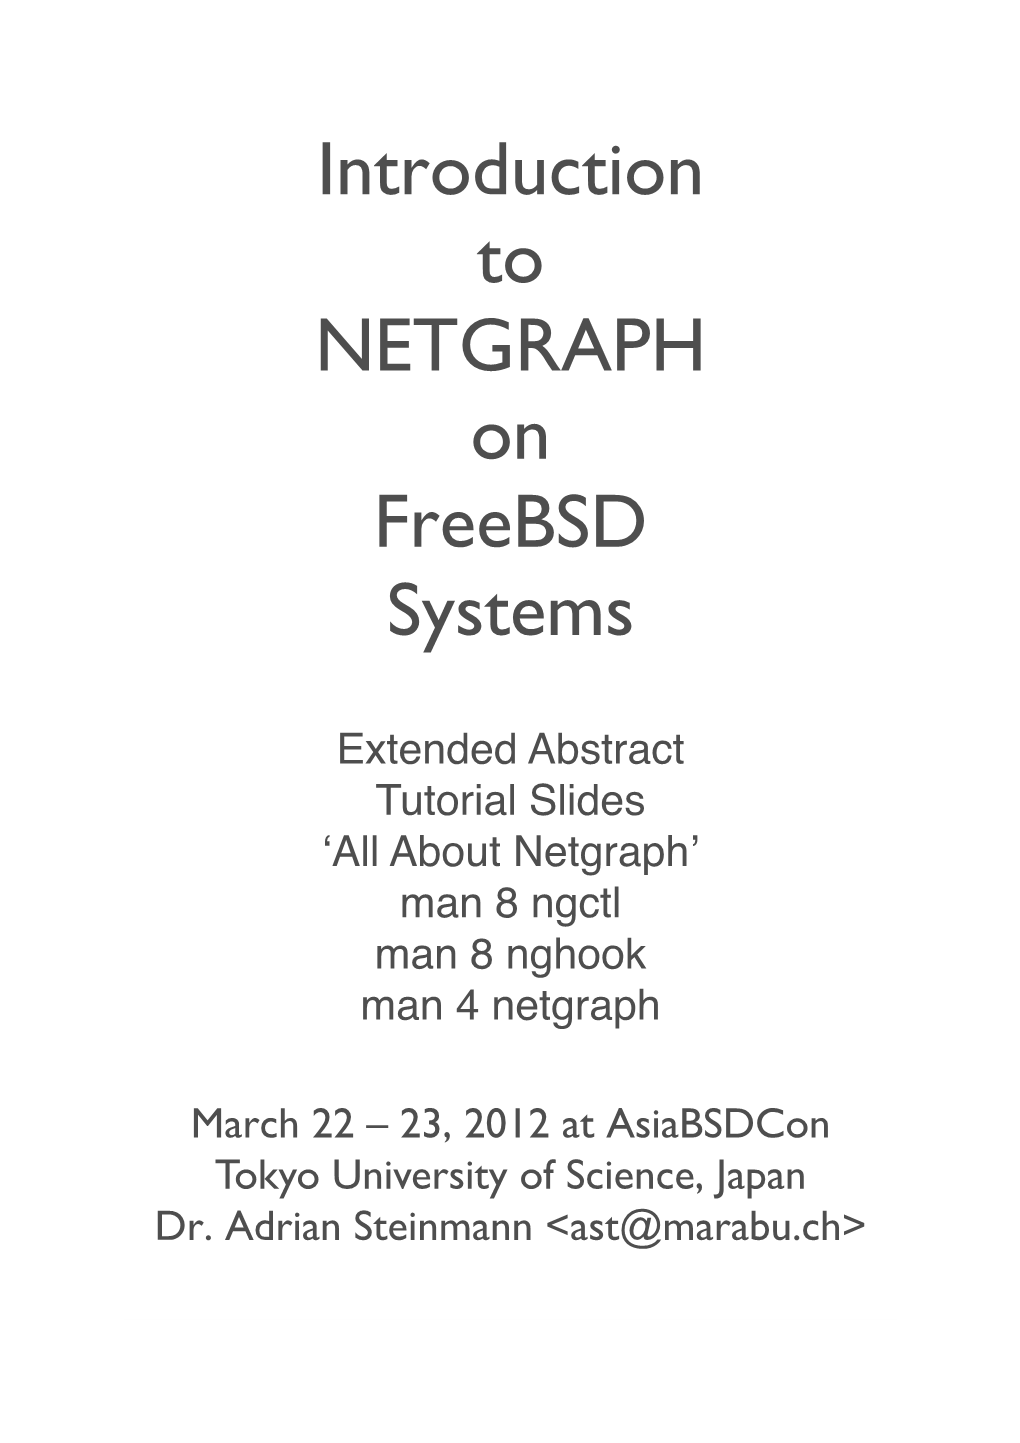 Introduction to NETGRAPH on Freebsd Systems